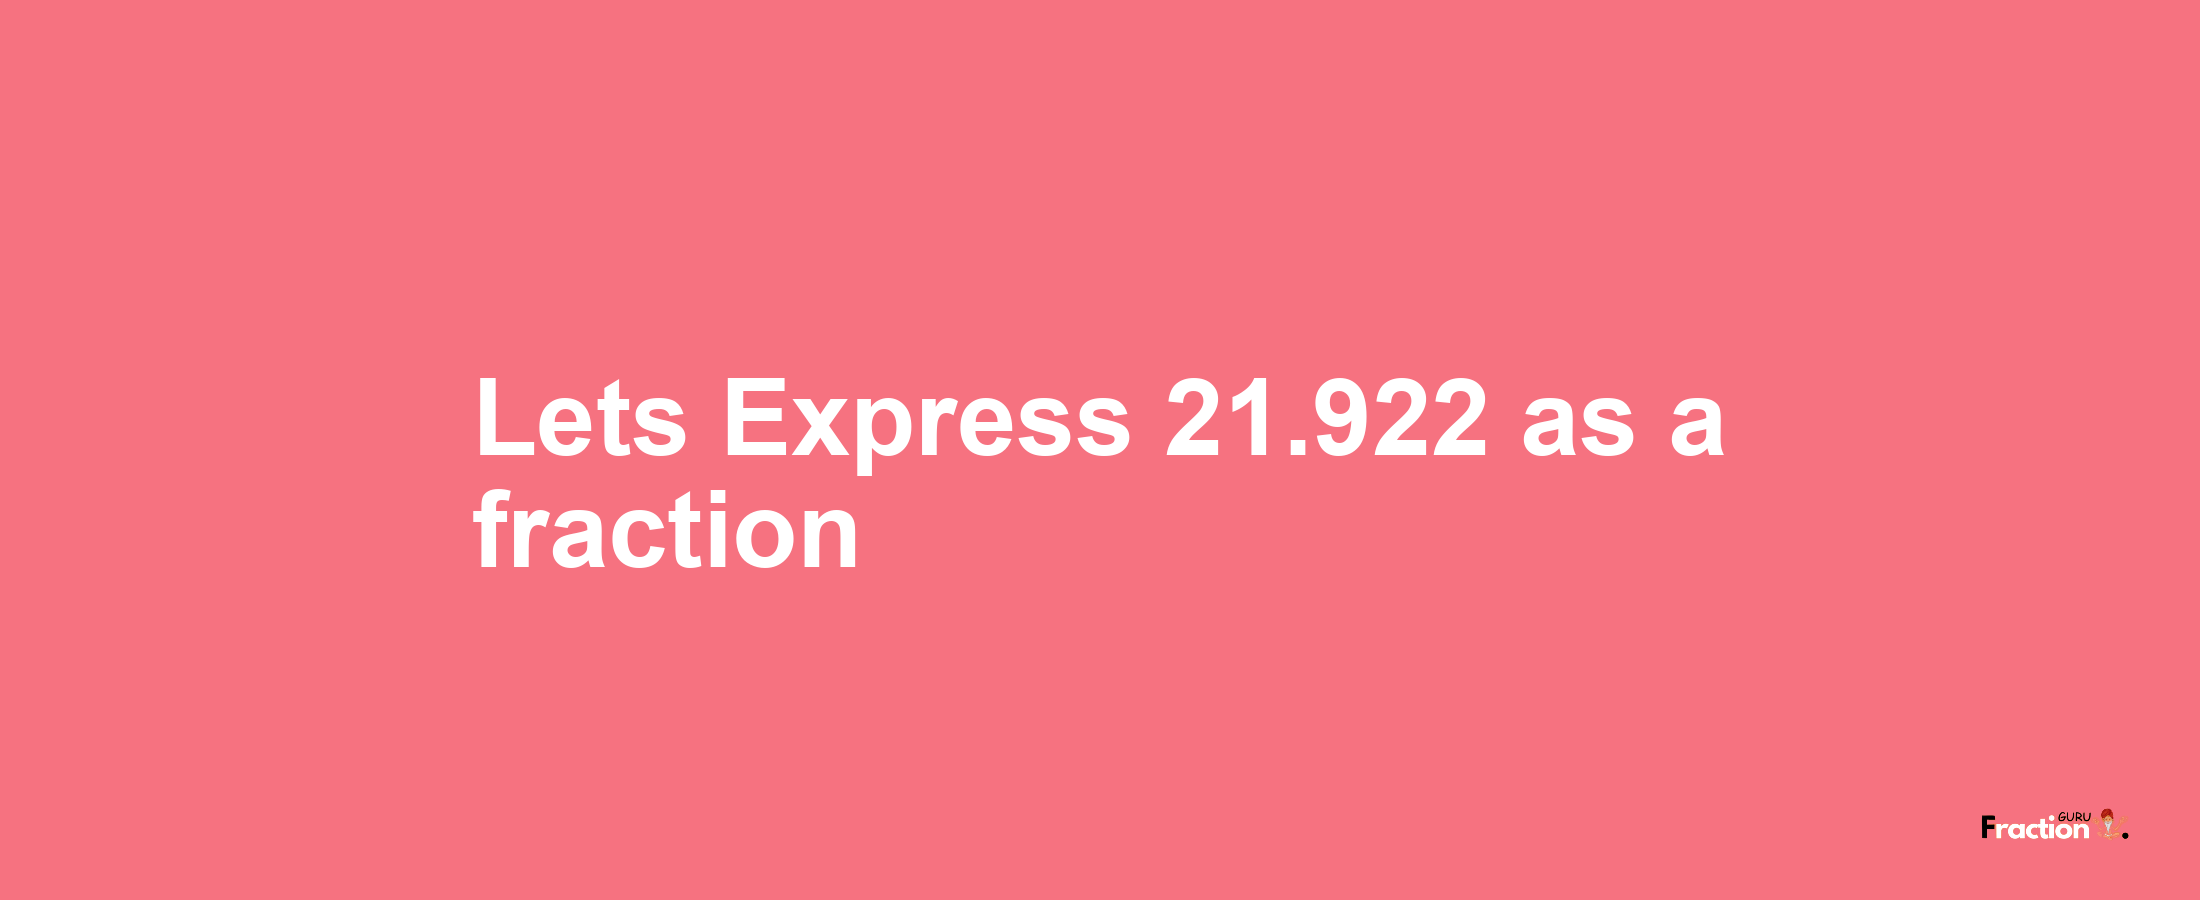 Lets Express 21.922 as afraction